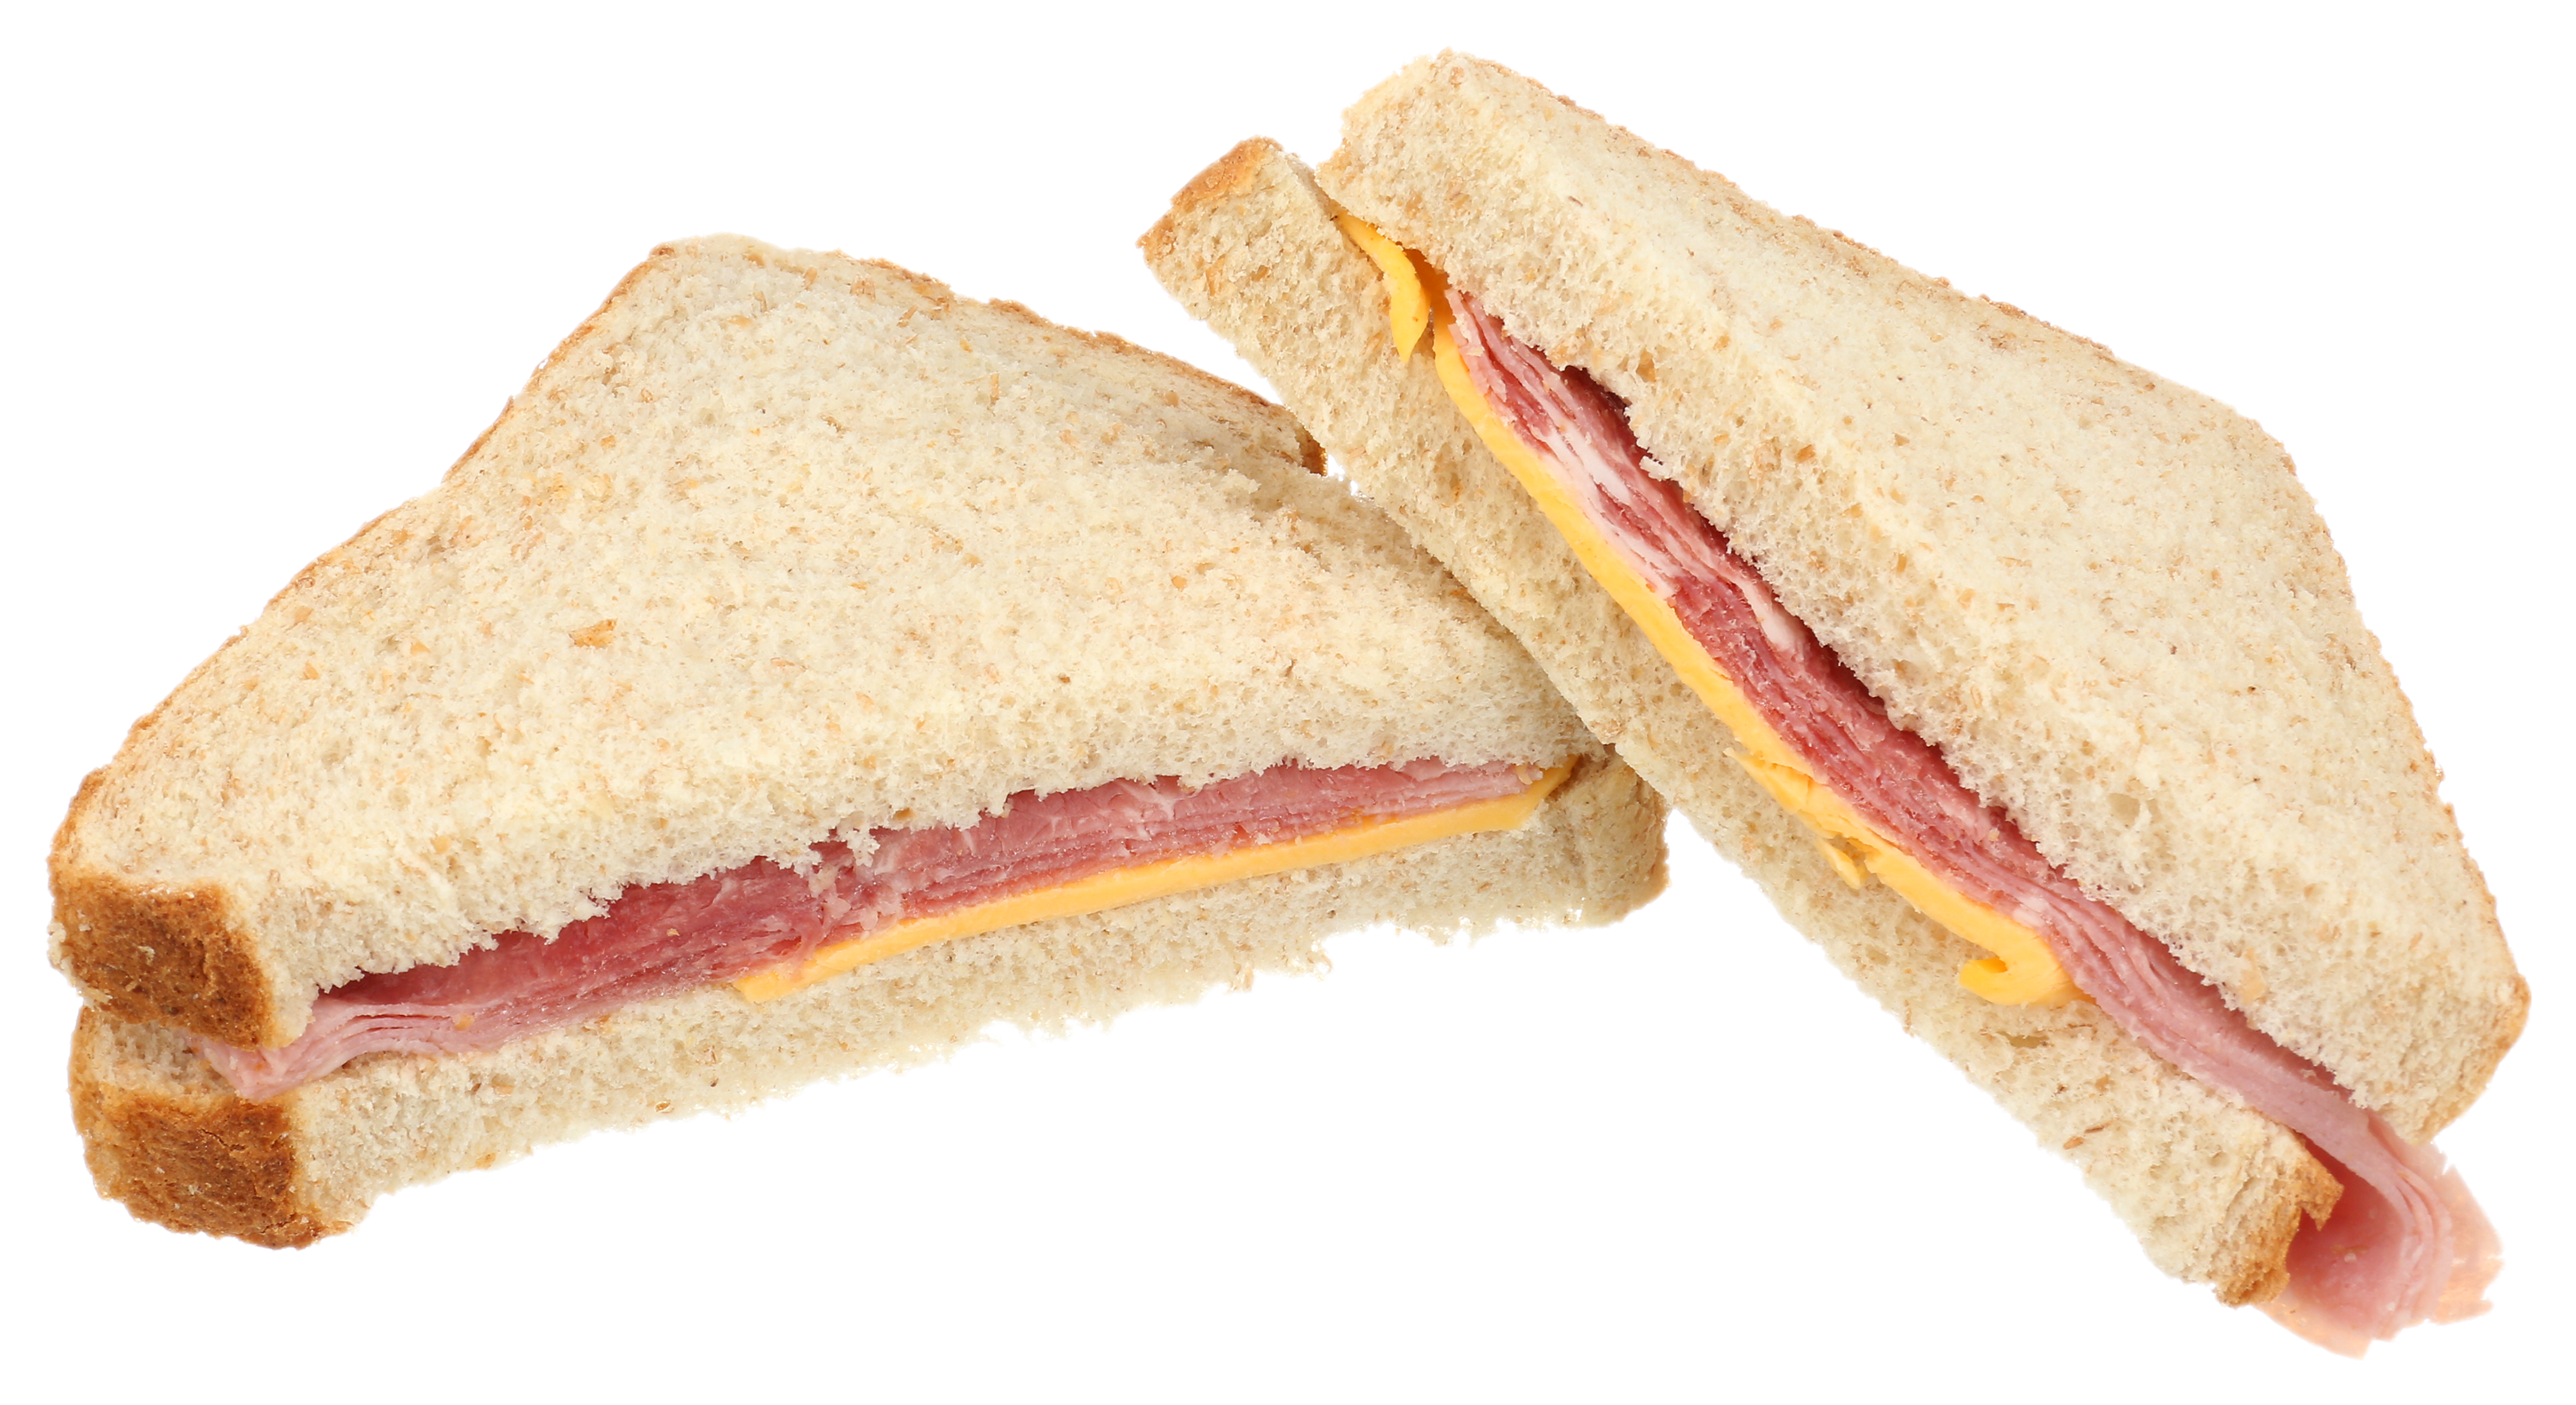 AdvancePierre™ Ham And Cheese On Wheat Bread Sandwich, 4.71 oz, 12 Pieces, 3.48 Lbshttp://images.salsify.com/image/upload/s--bOkyVelc--/c3k1bkjdi9t5vzgedf2h.webp